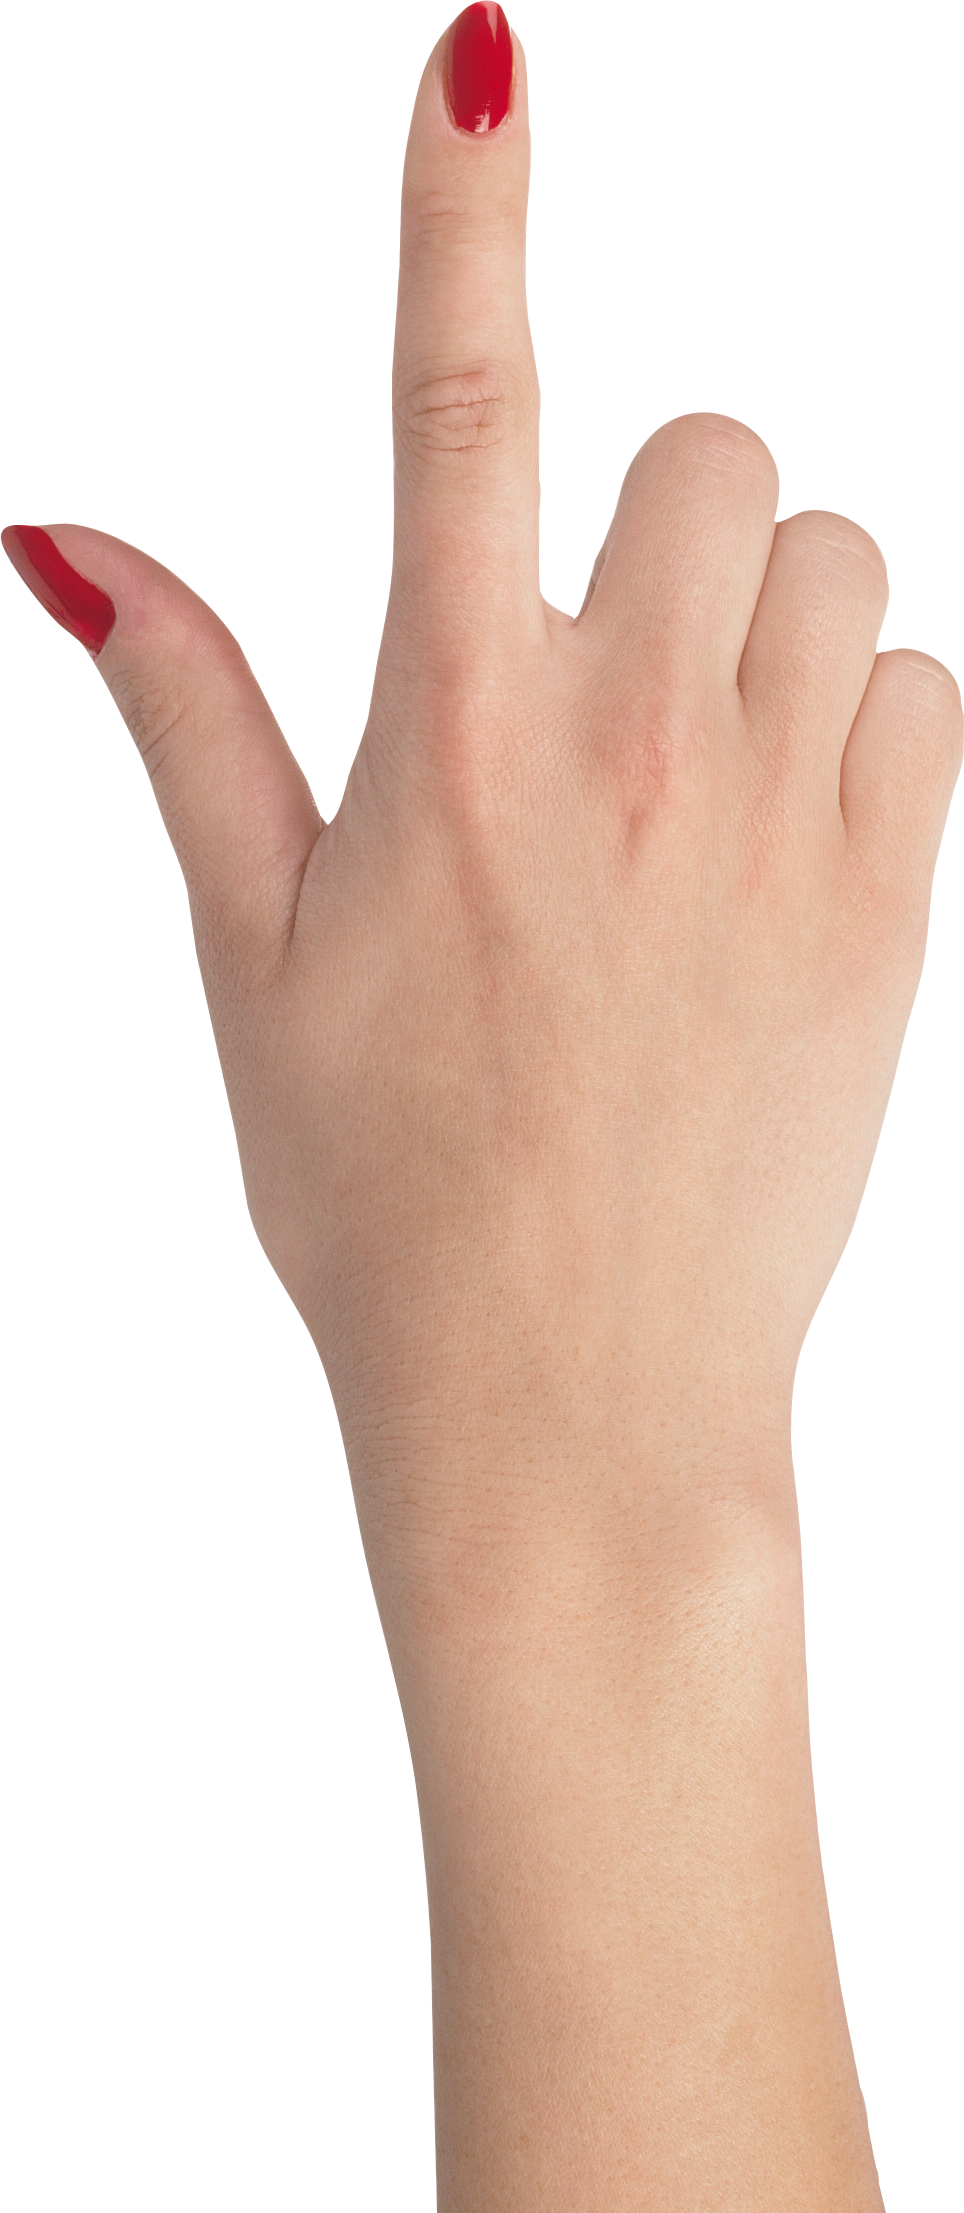 Hands png free images. Finger clipart hand grab